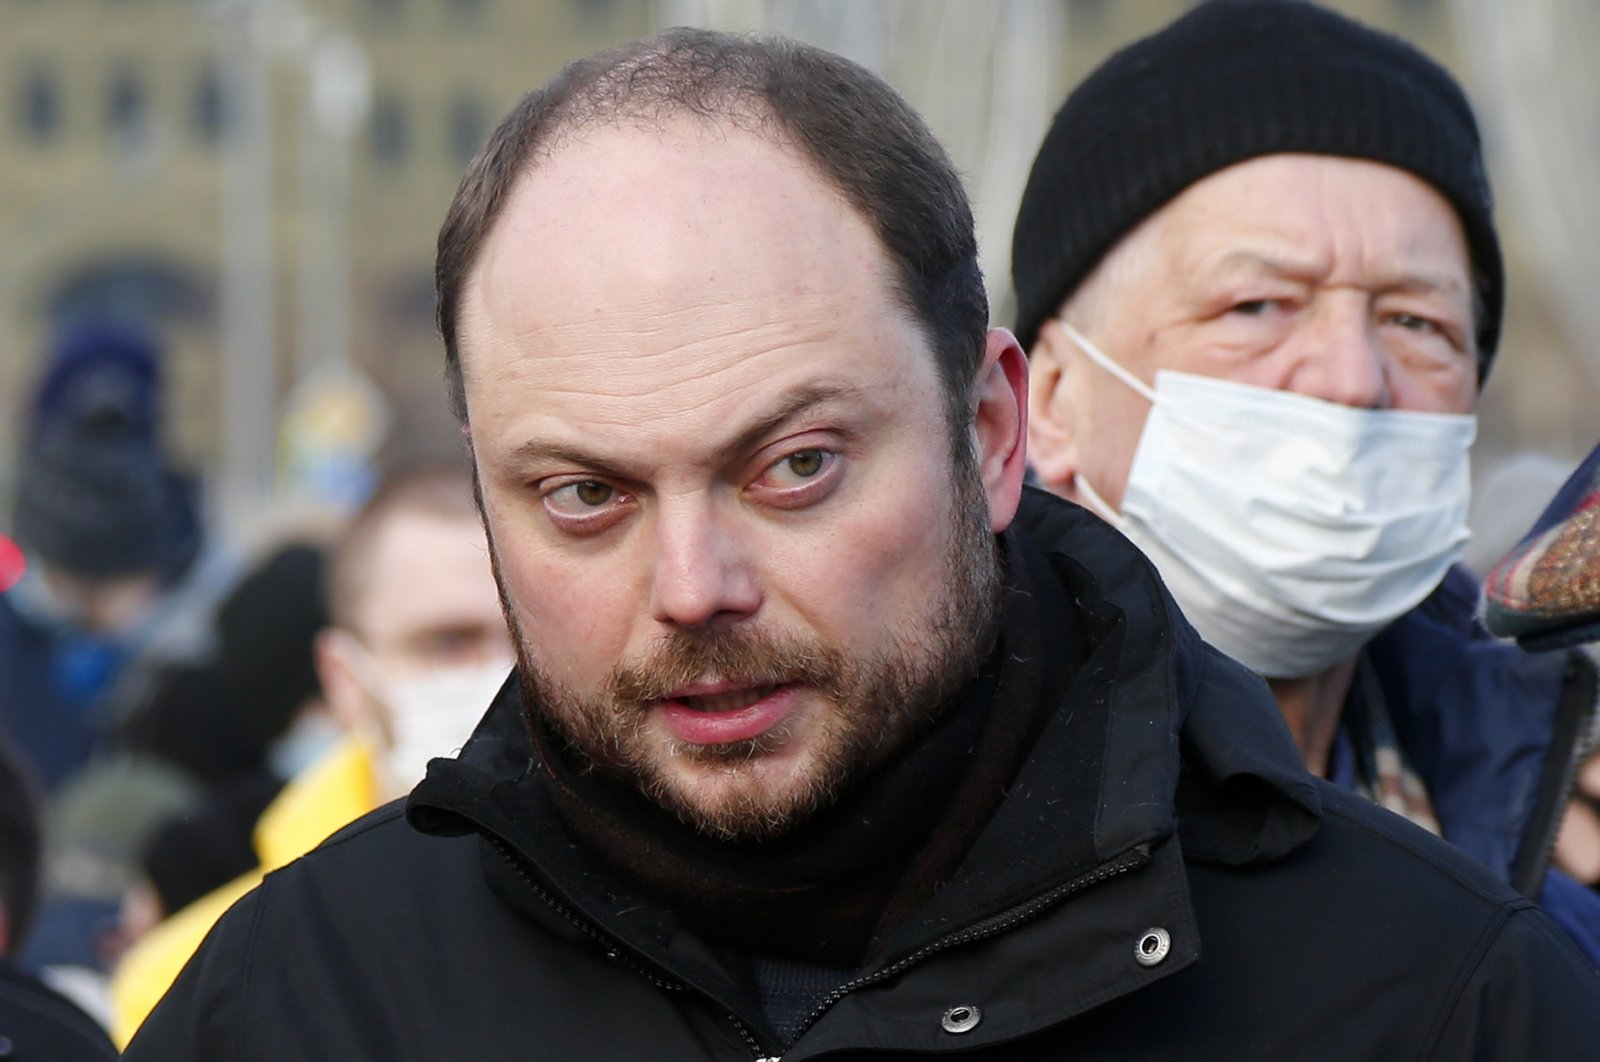 Russian opposition activist Vladimir Kara-Murza arrives to lay flowers near the place where Russian opposition leader Boris Nemtsov was gunned down, in Moscow, Russia, Saturday, Feb. 27, 2021. (AP Photo)